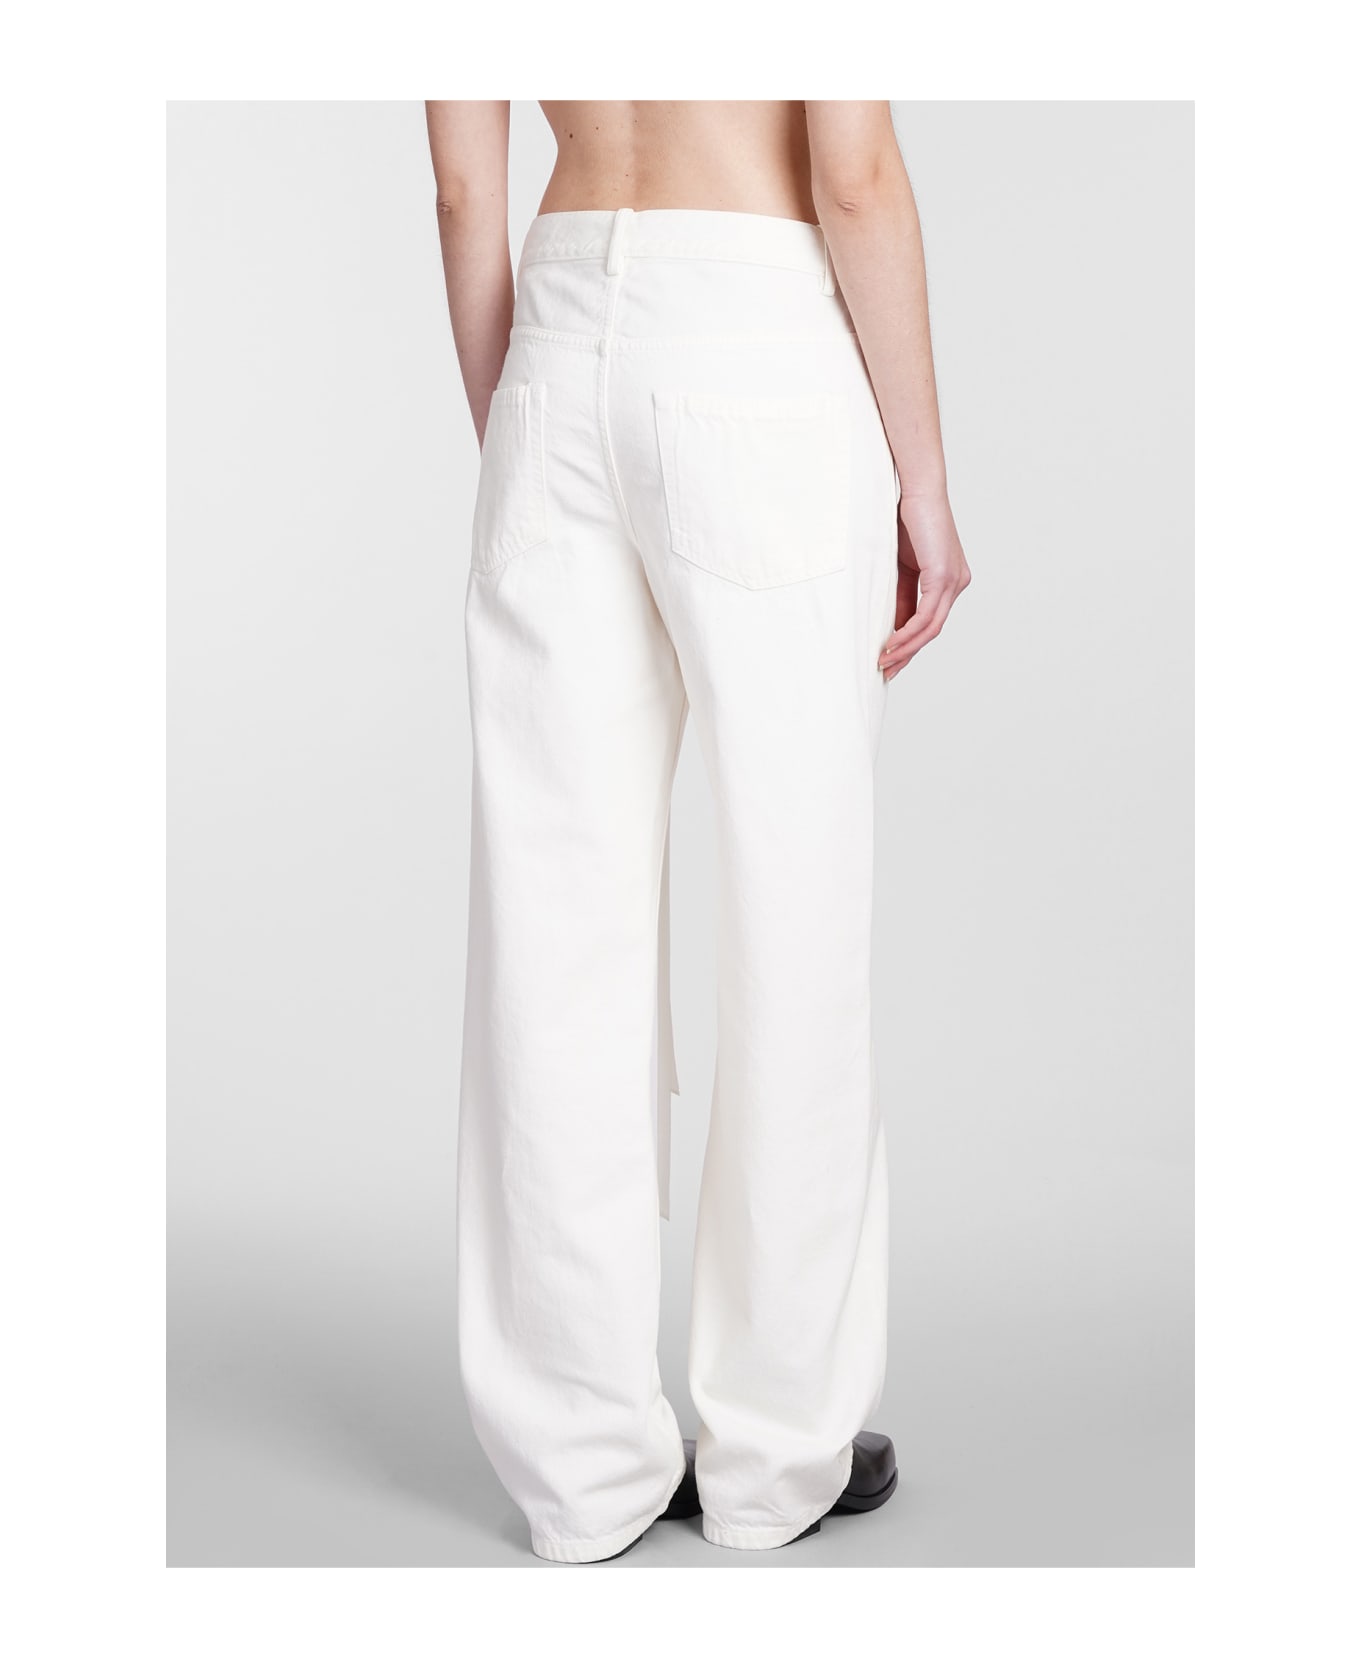 Ann Demeulemeester Jeans In White Cotton - white